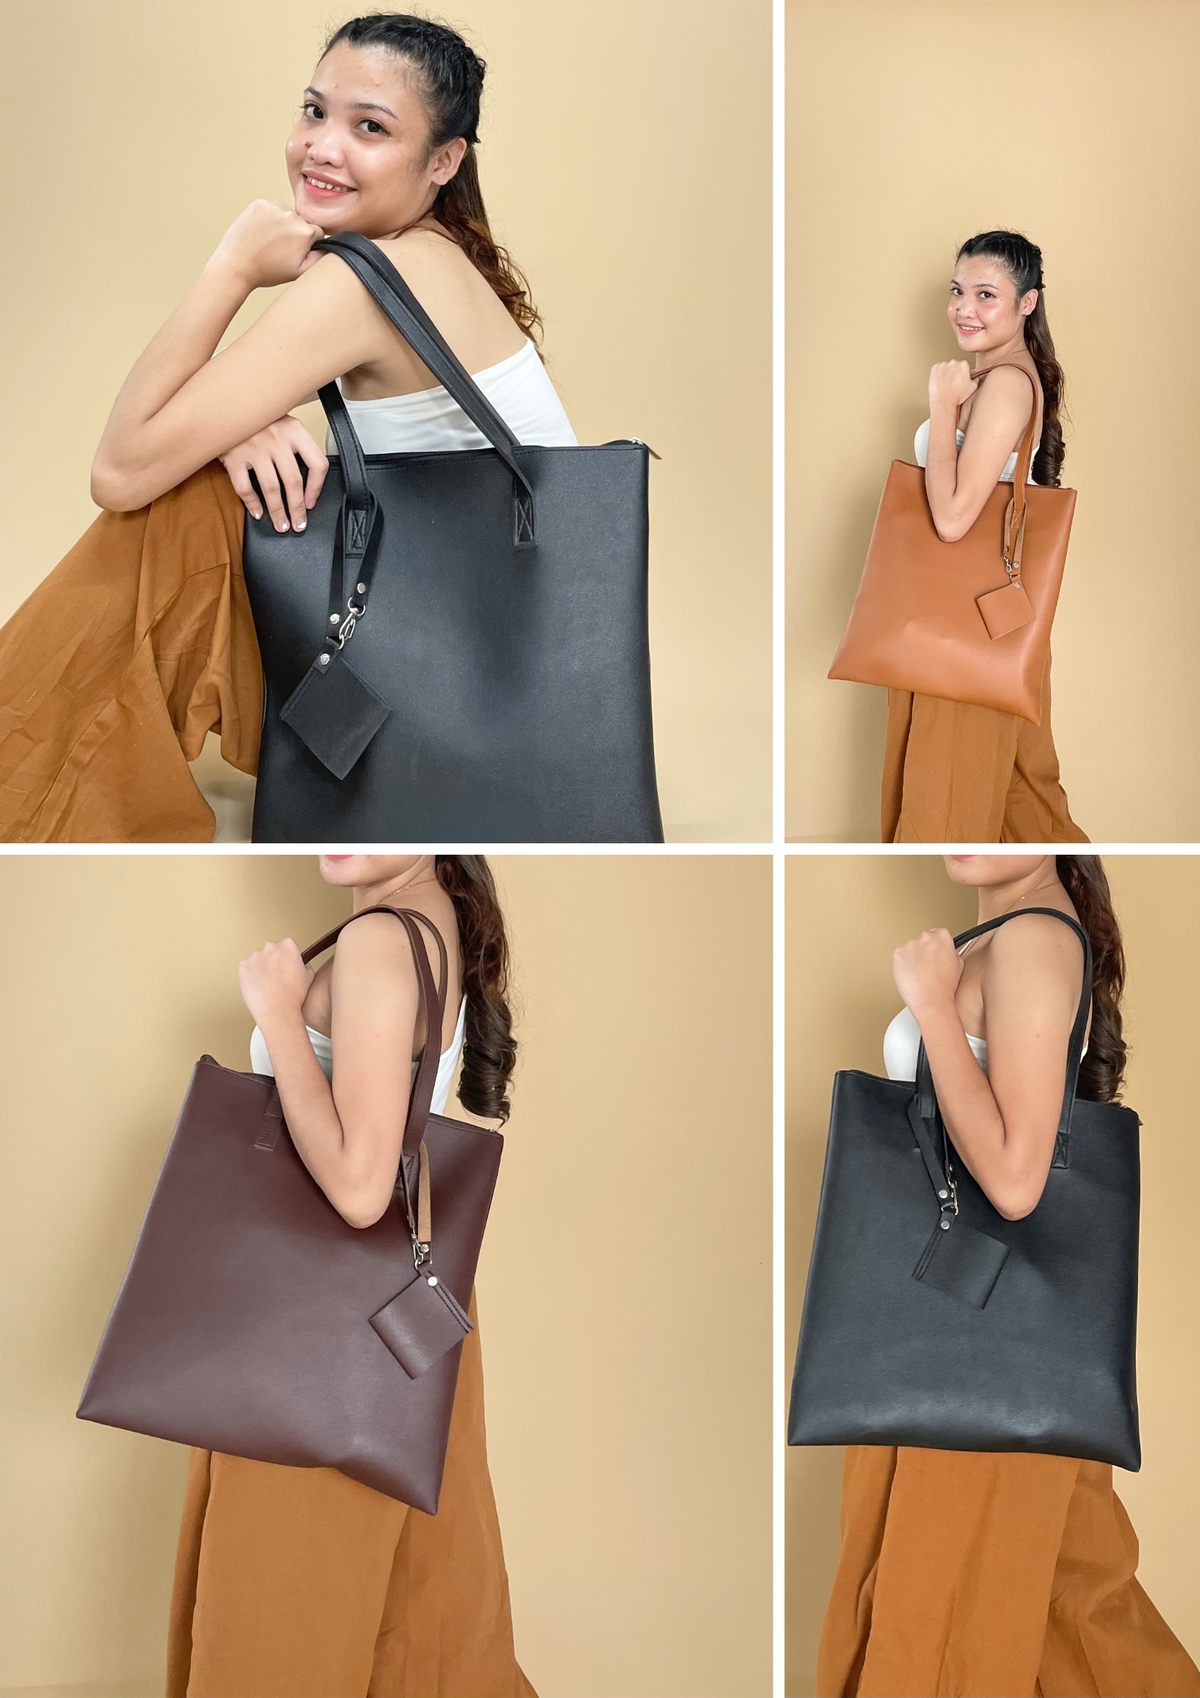 Tote Bag with Alcohol Holder